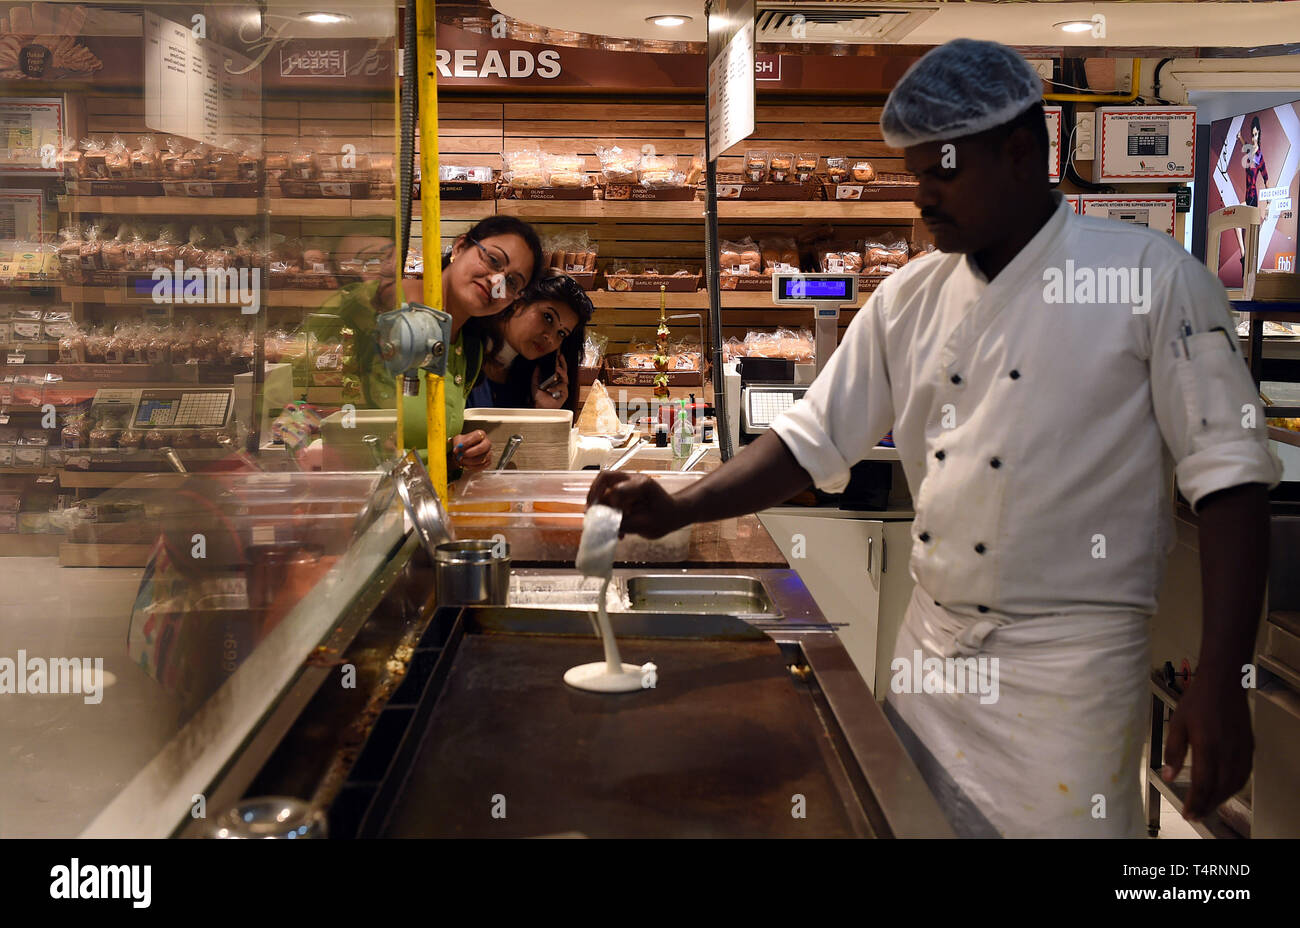 New Delhi, India. 18th Apr, 2019. An Indian chef makes Dosa for a customer at a supermarket in New Delhi, India, April 18, 2019. Dosa, a crispy paper-thin wrap with a spicy potato filling, eaten dipped in a tangy soup and a special sauce or chutney, is popular in southern India. Credit: Zhang Naijie/Xinhua/Alamy Live News Stock Photo